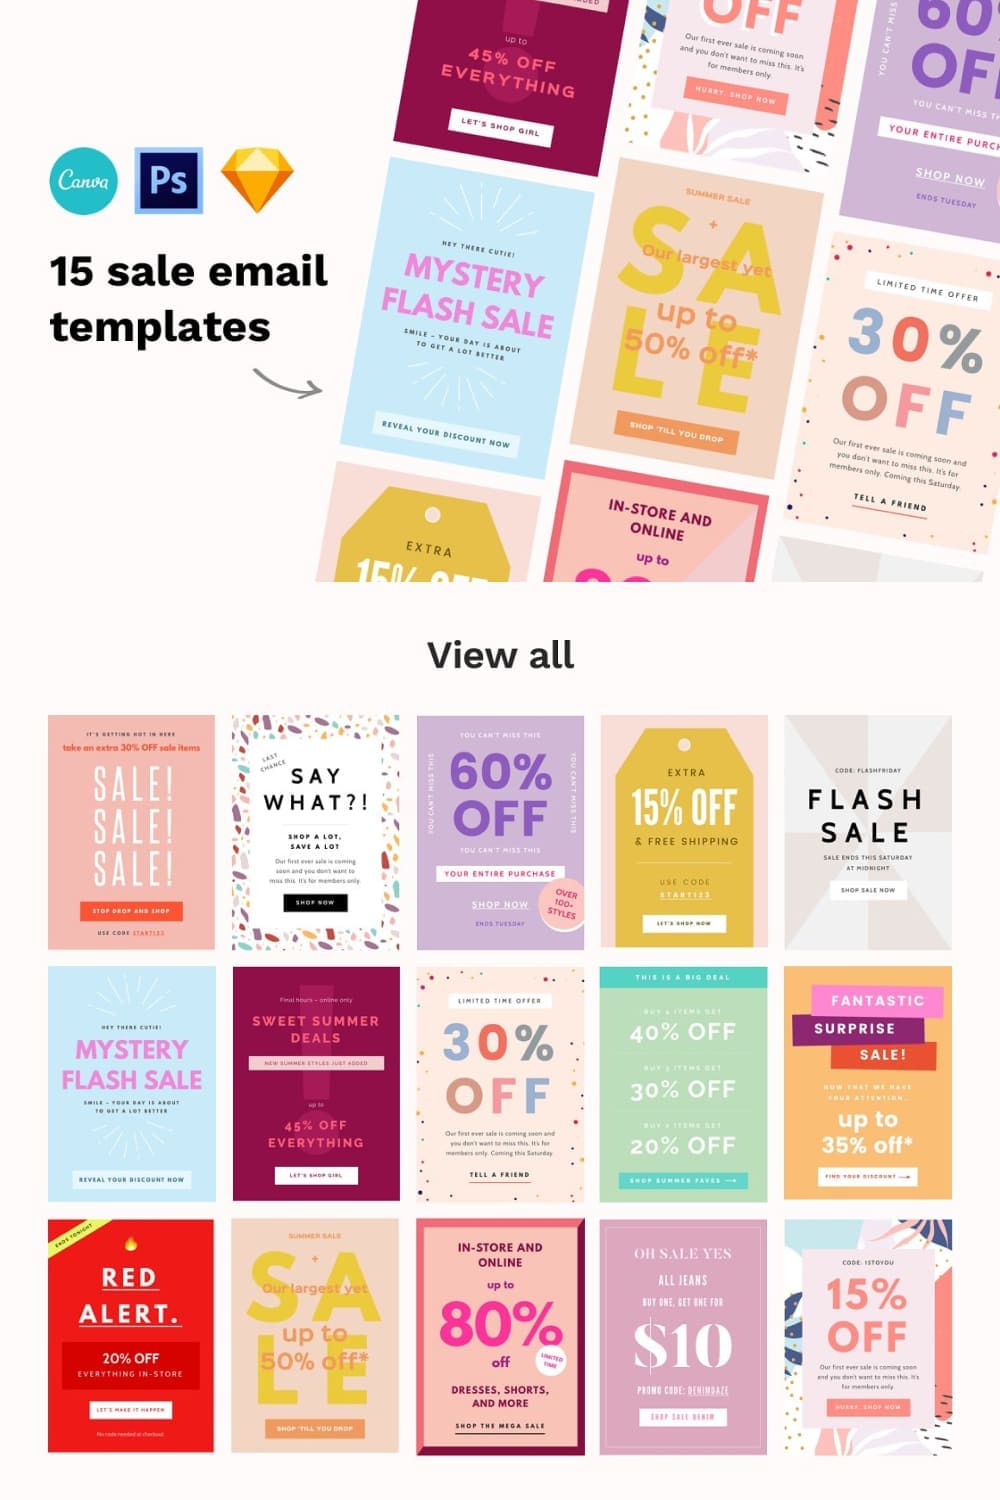 Image collection of enchanting email design templates.